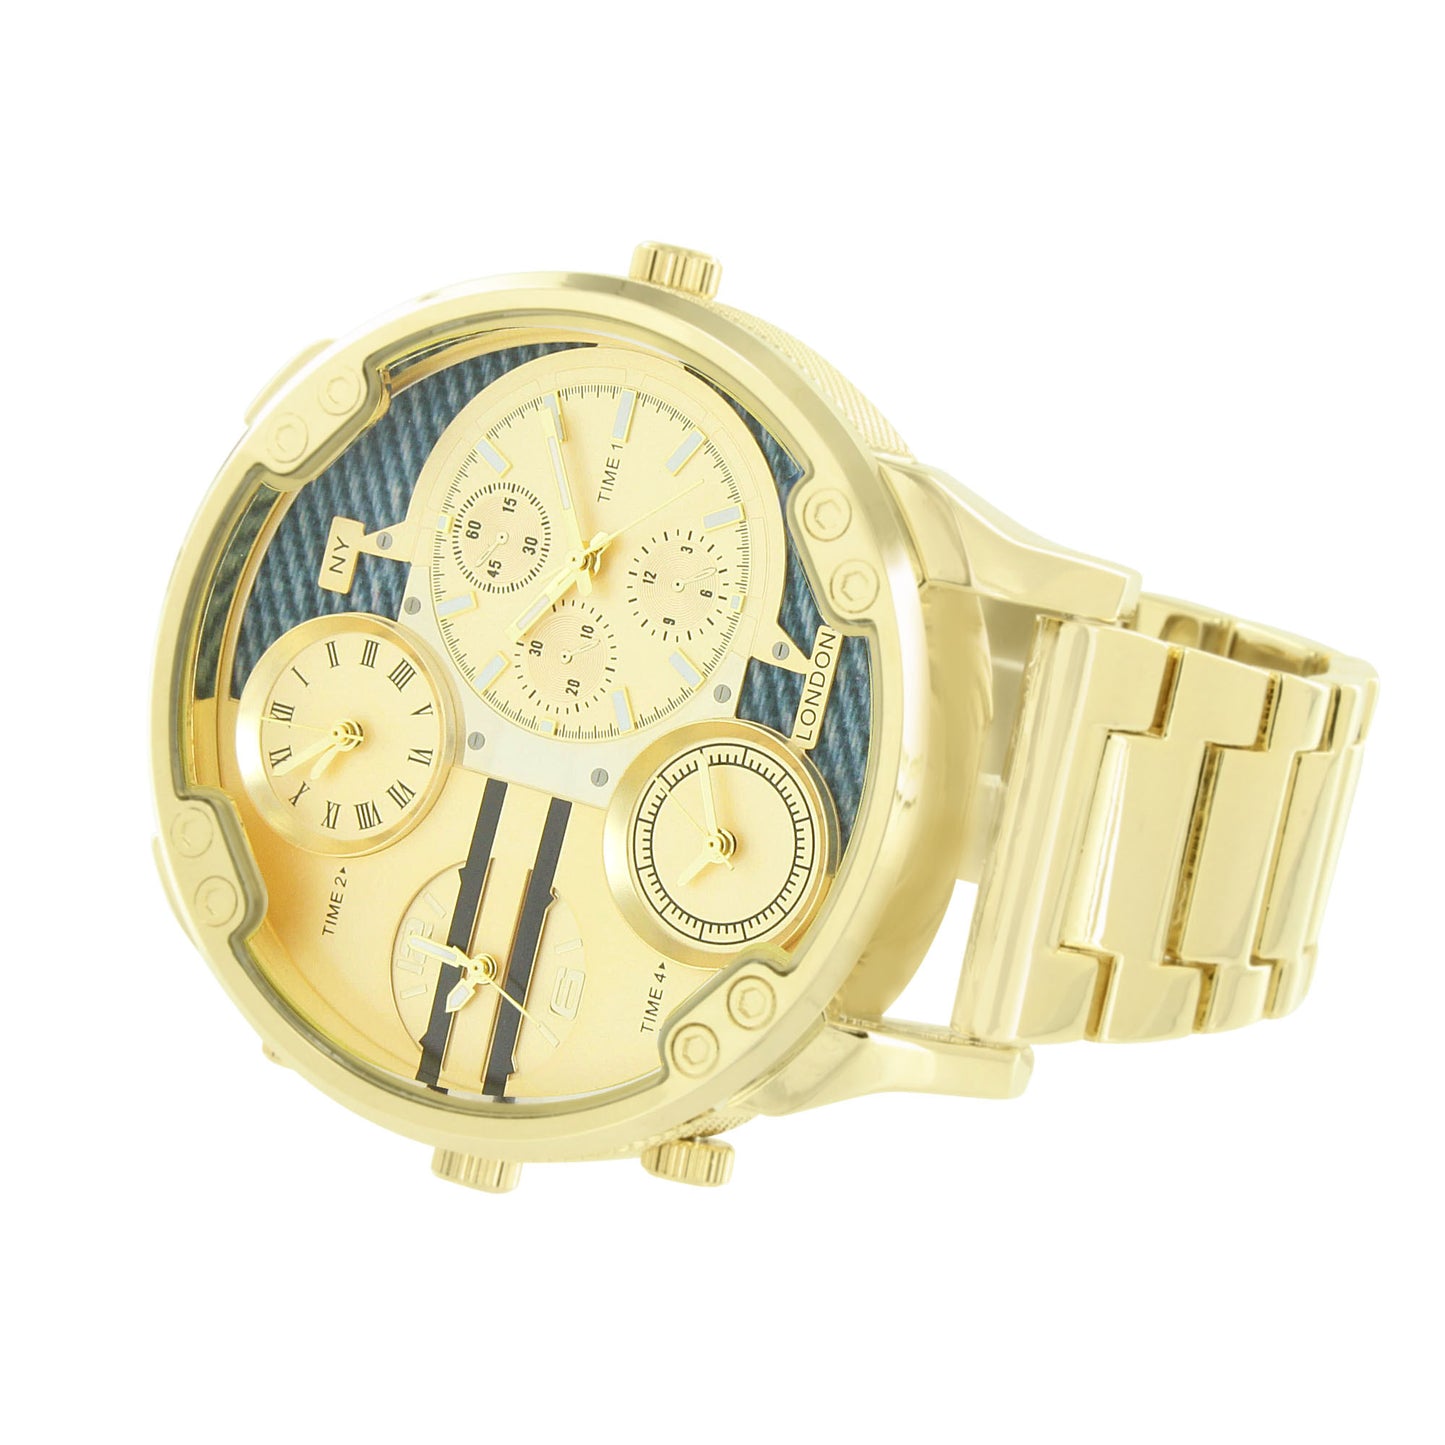 Gold Finish Watch Large Face Round Analog 3 Timezone Look 63 MM